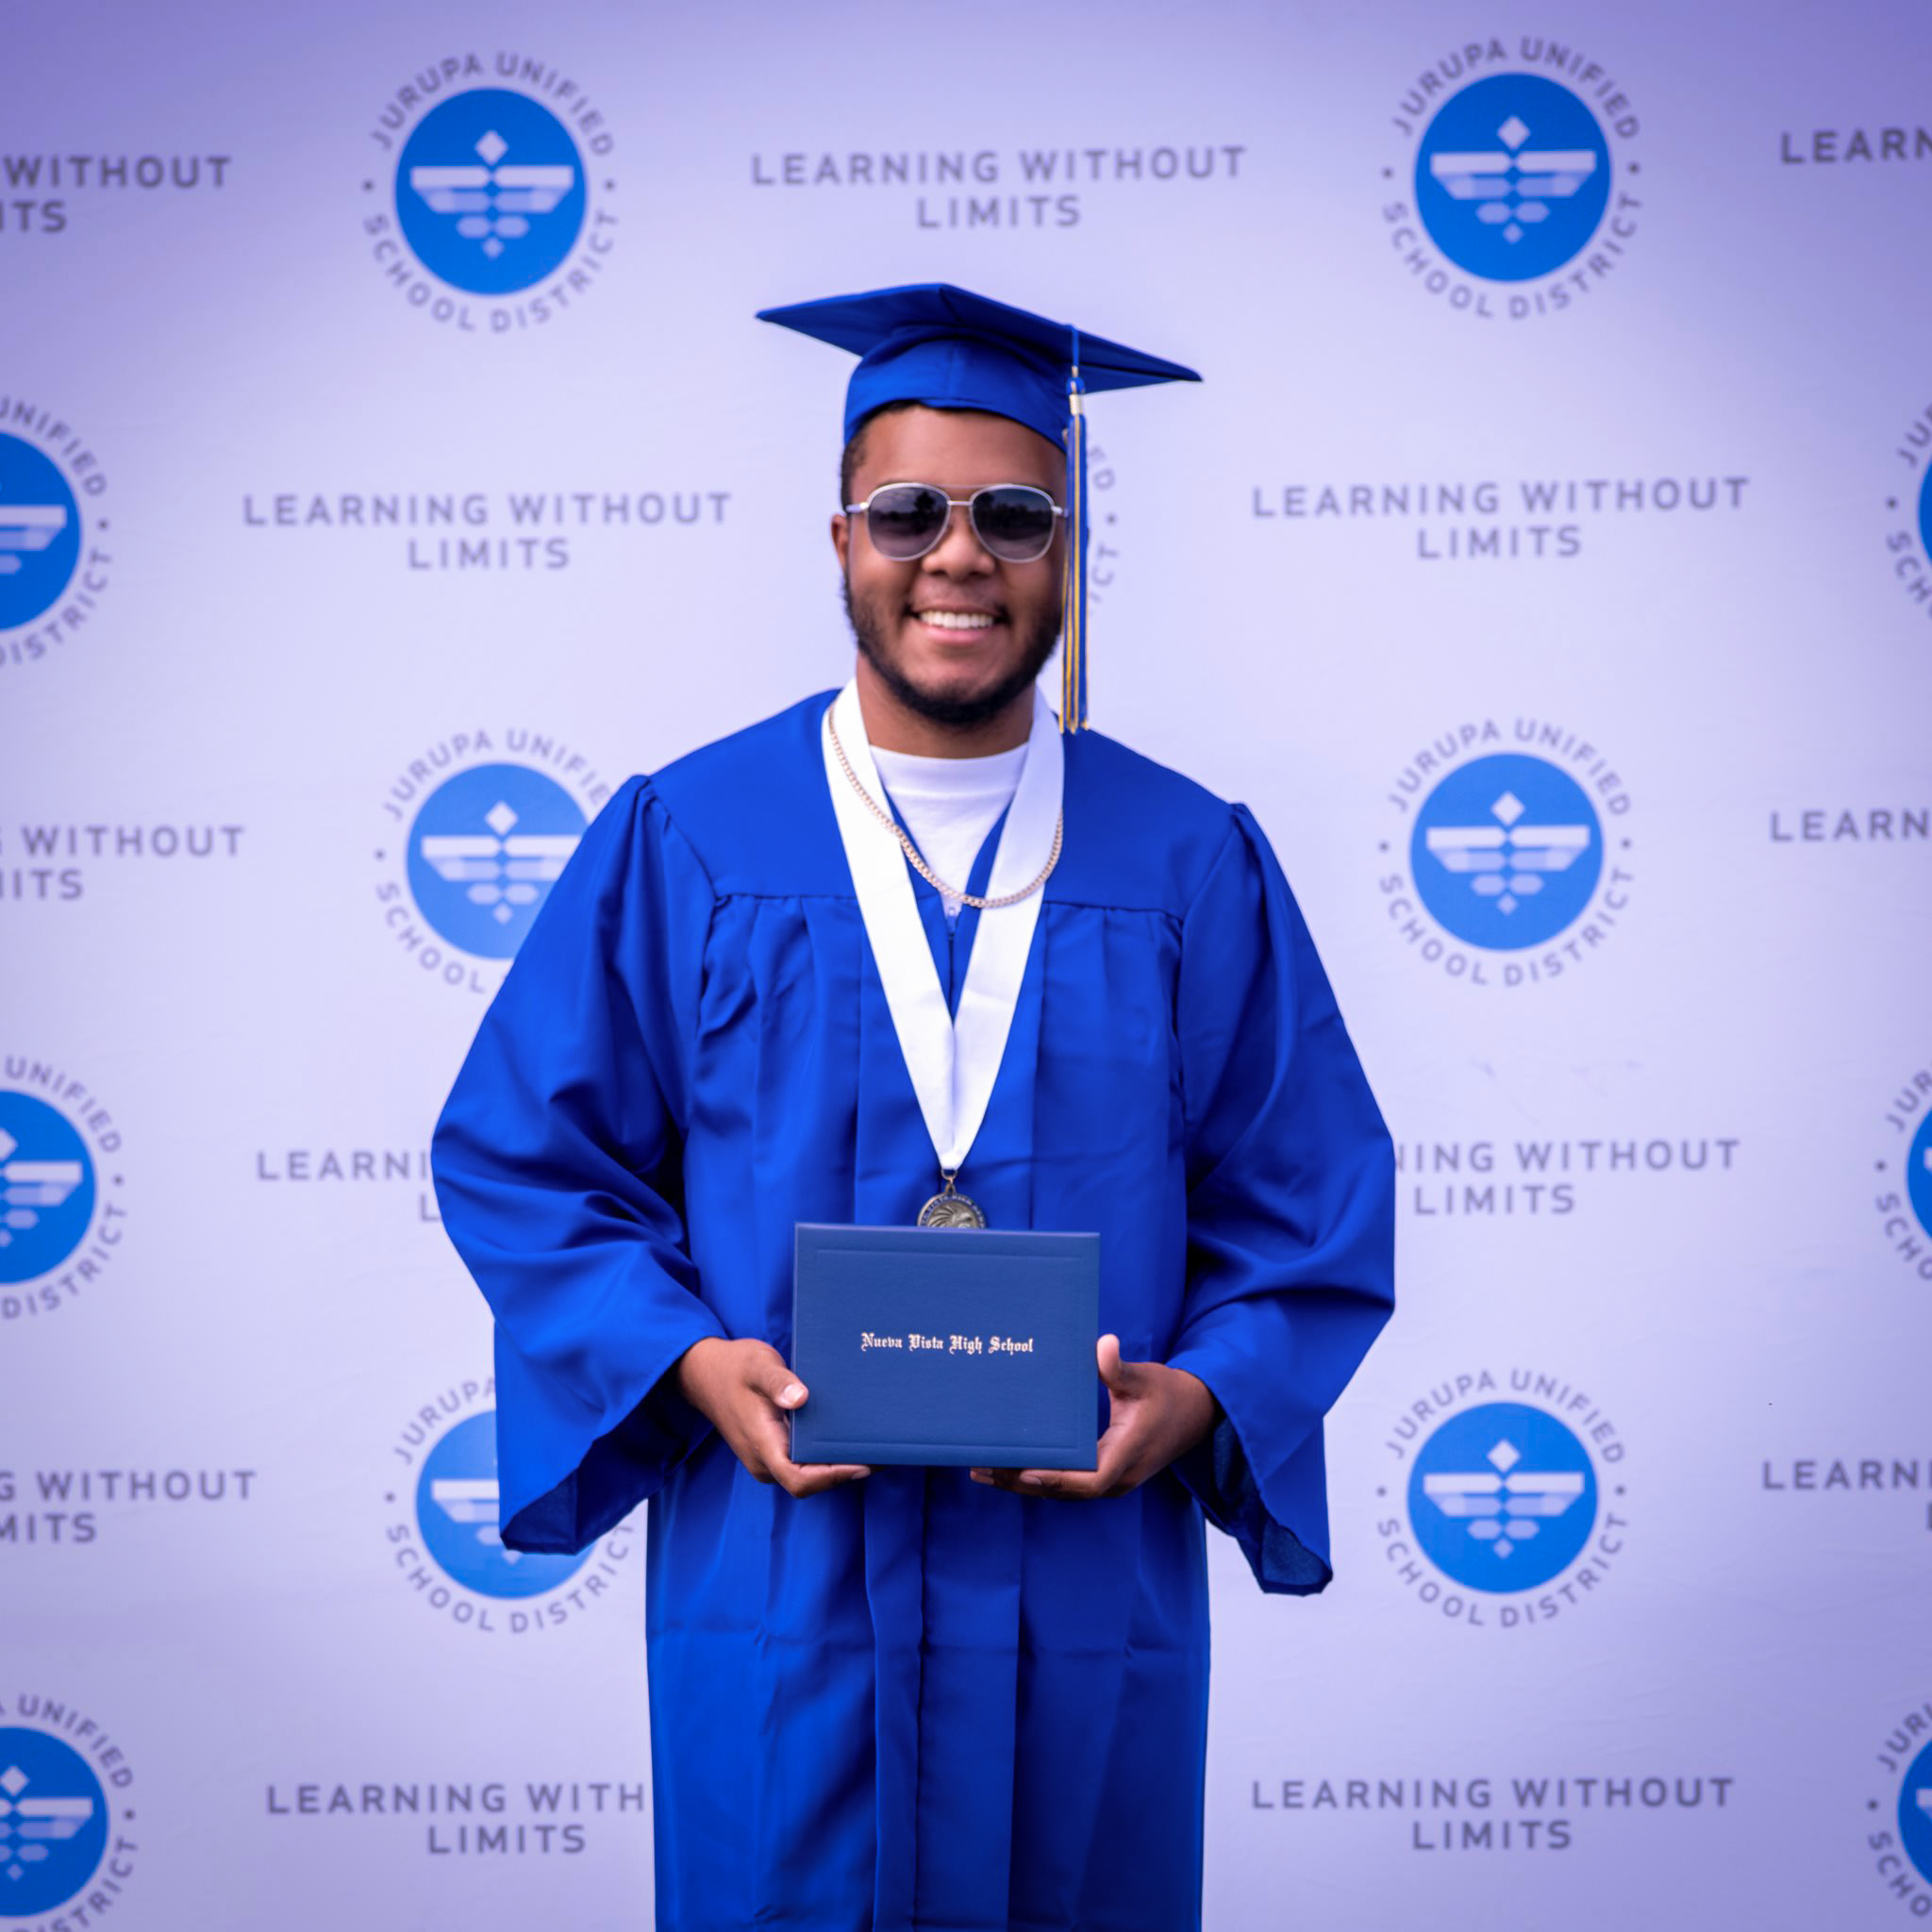 Graduate in sunglasses poses with diploma